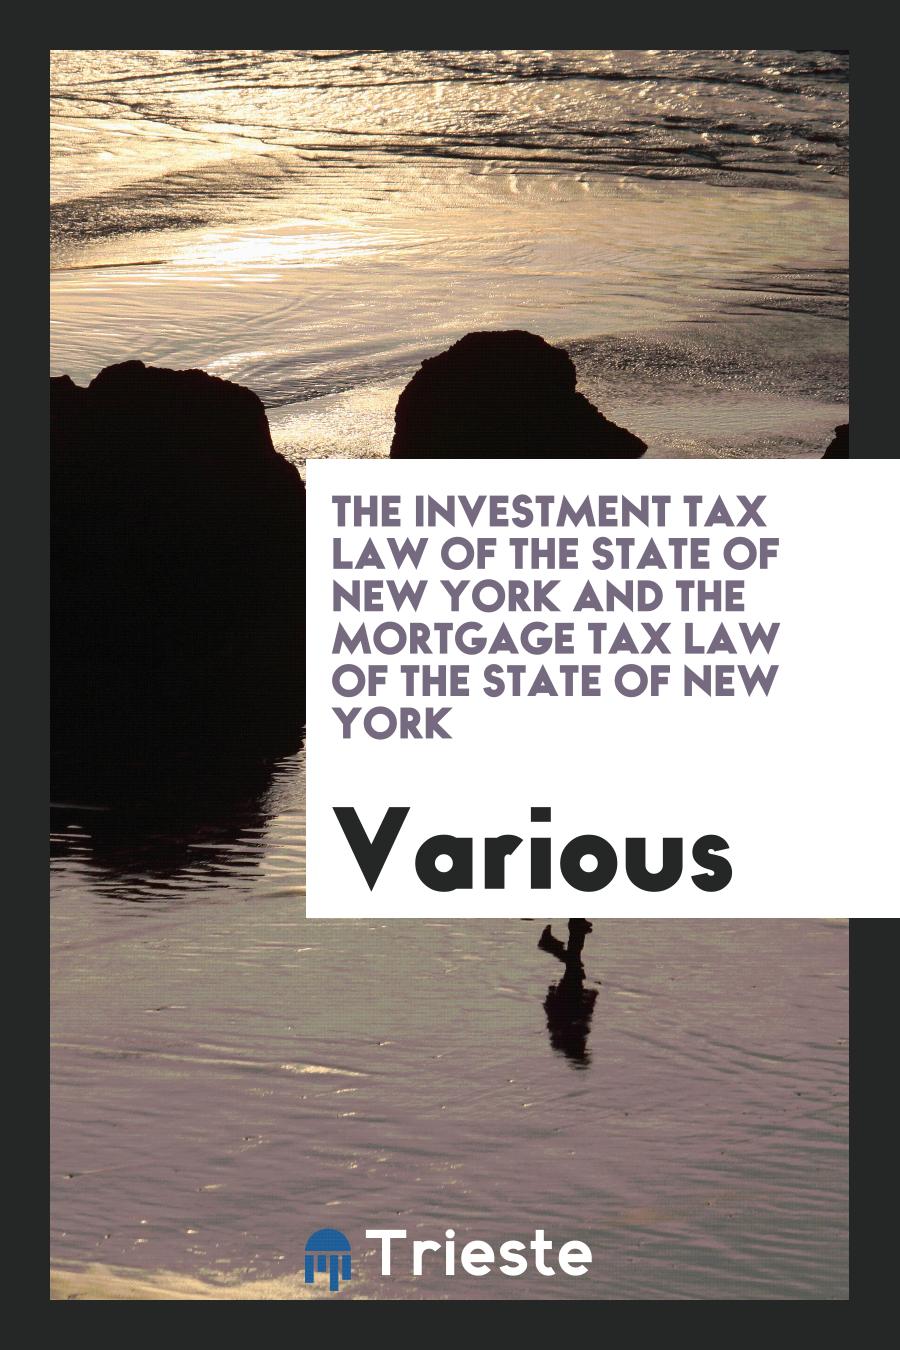 The Investment Tax Law of the State of New York and the Mortgage Tax Law of the State of New York